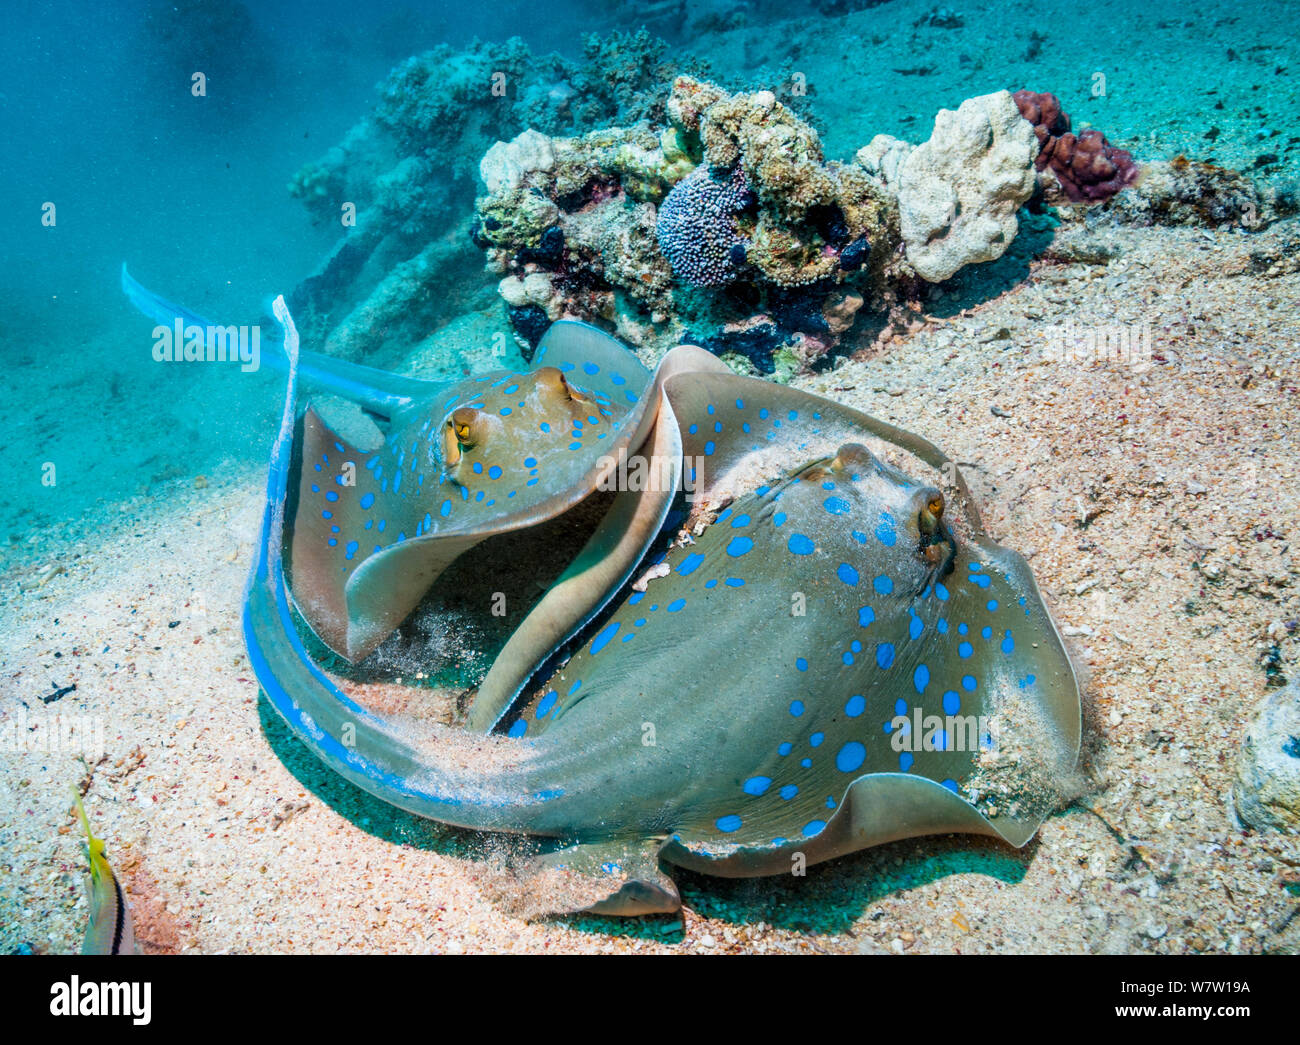 Bluespotted ribbontail rays (Taeniura lymna) with another swimming up from behind. Egypt, Red Sea. Stock Photo